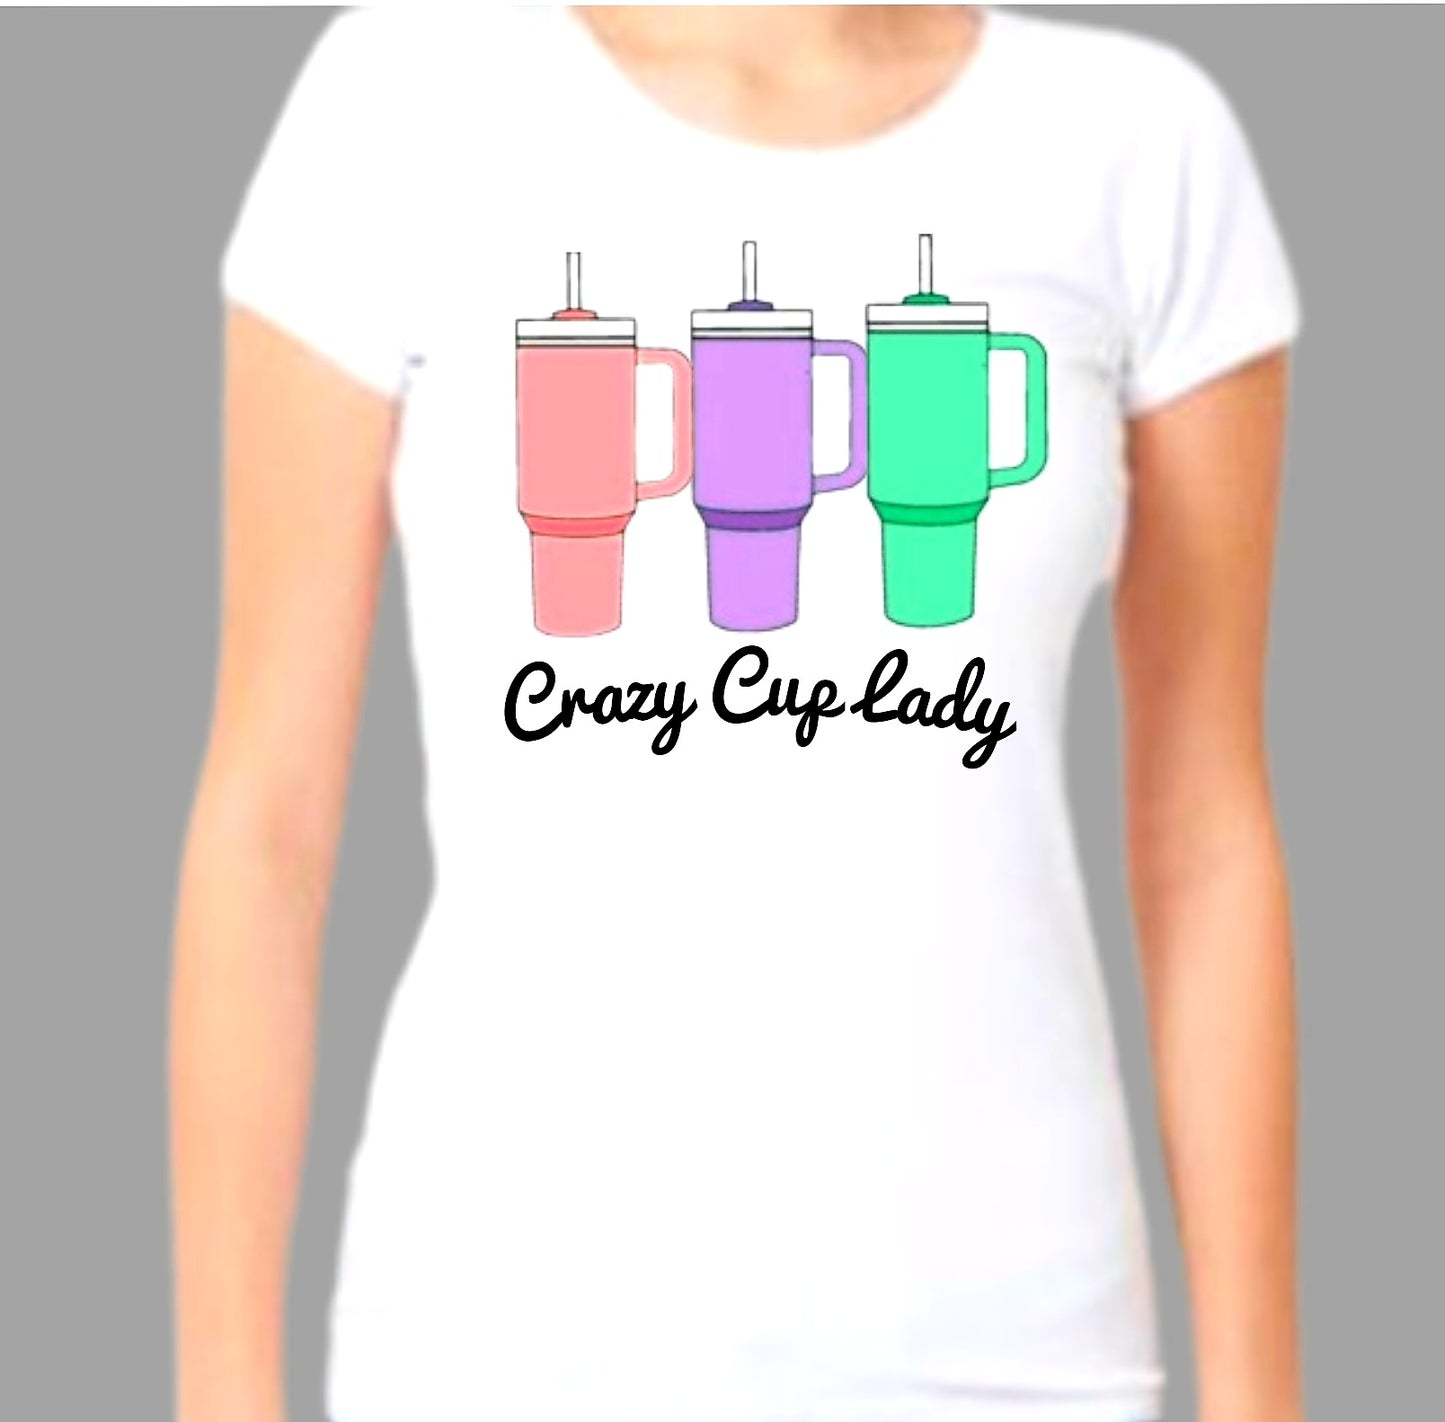 Crazy Cup Lady, Tee